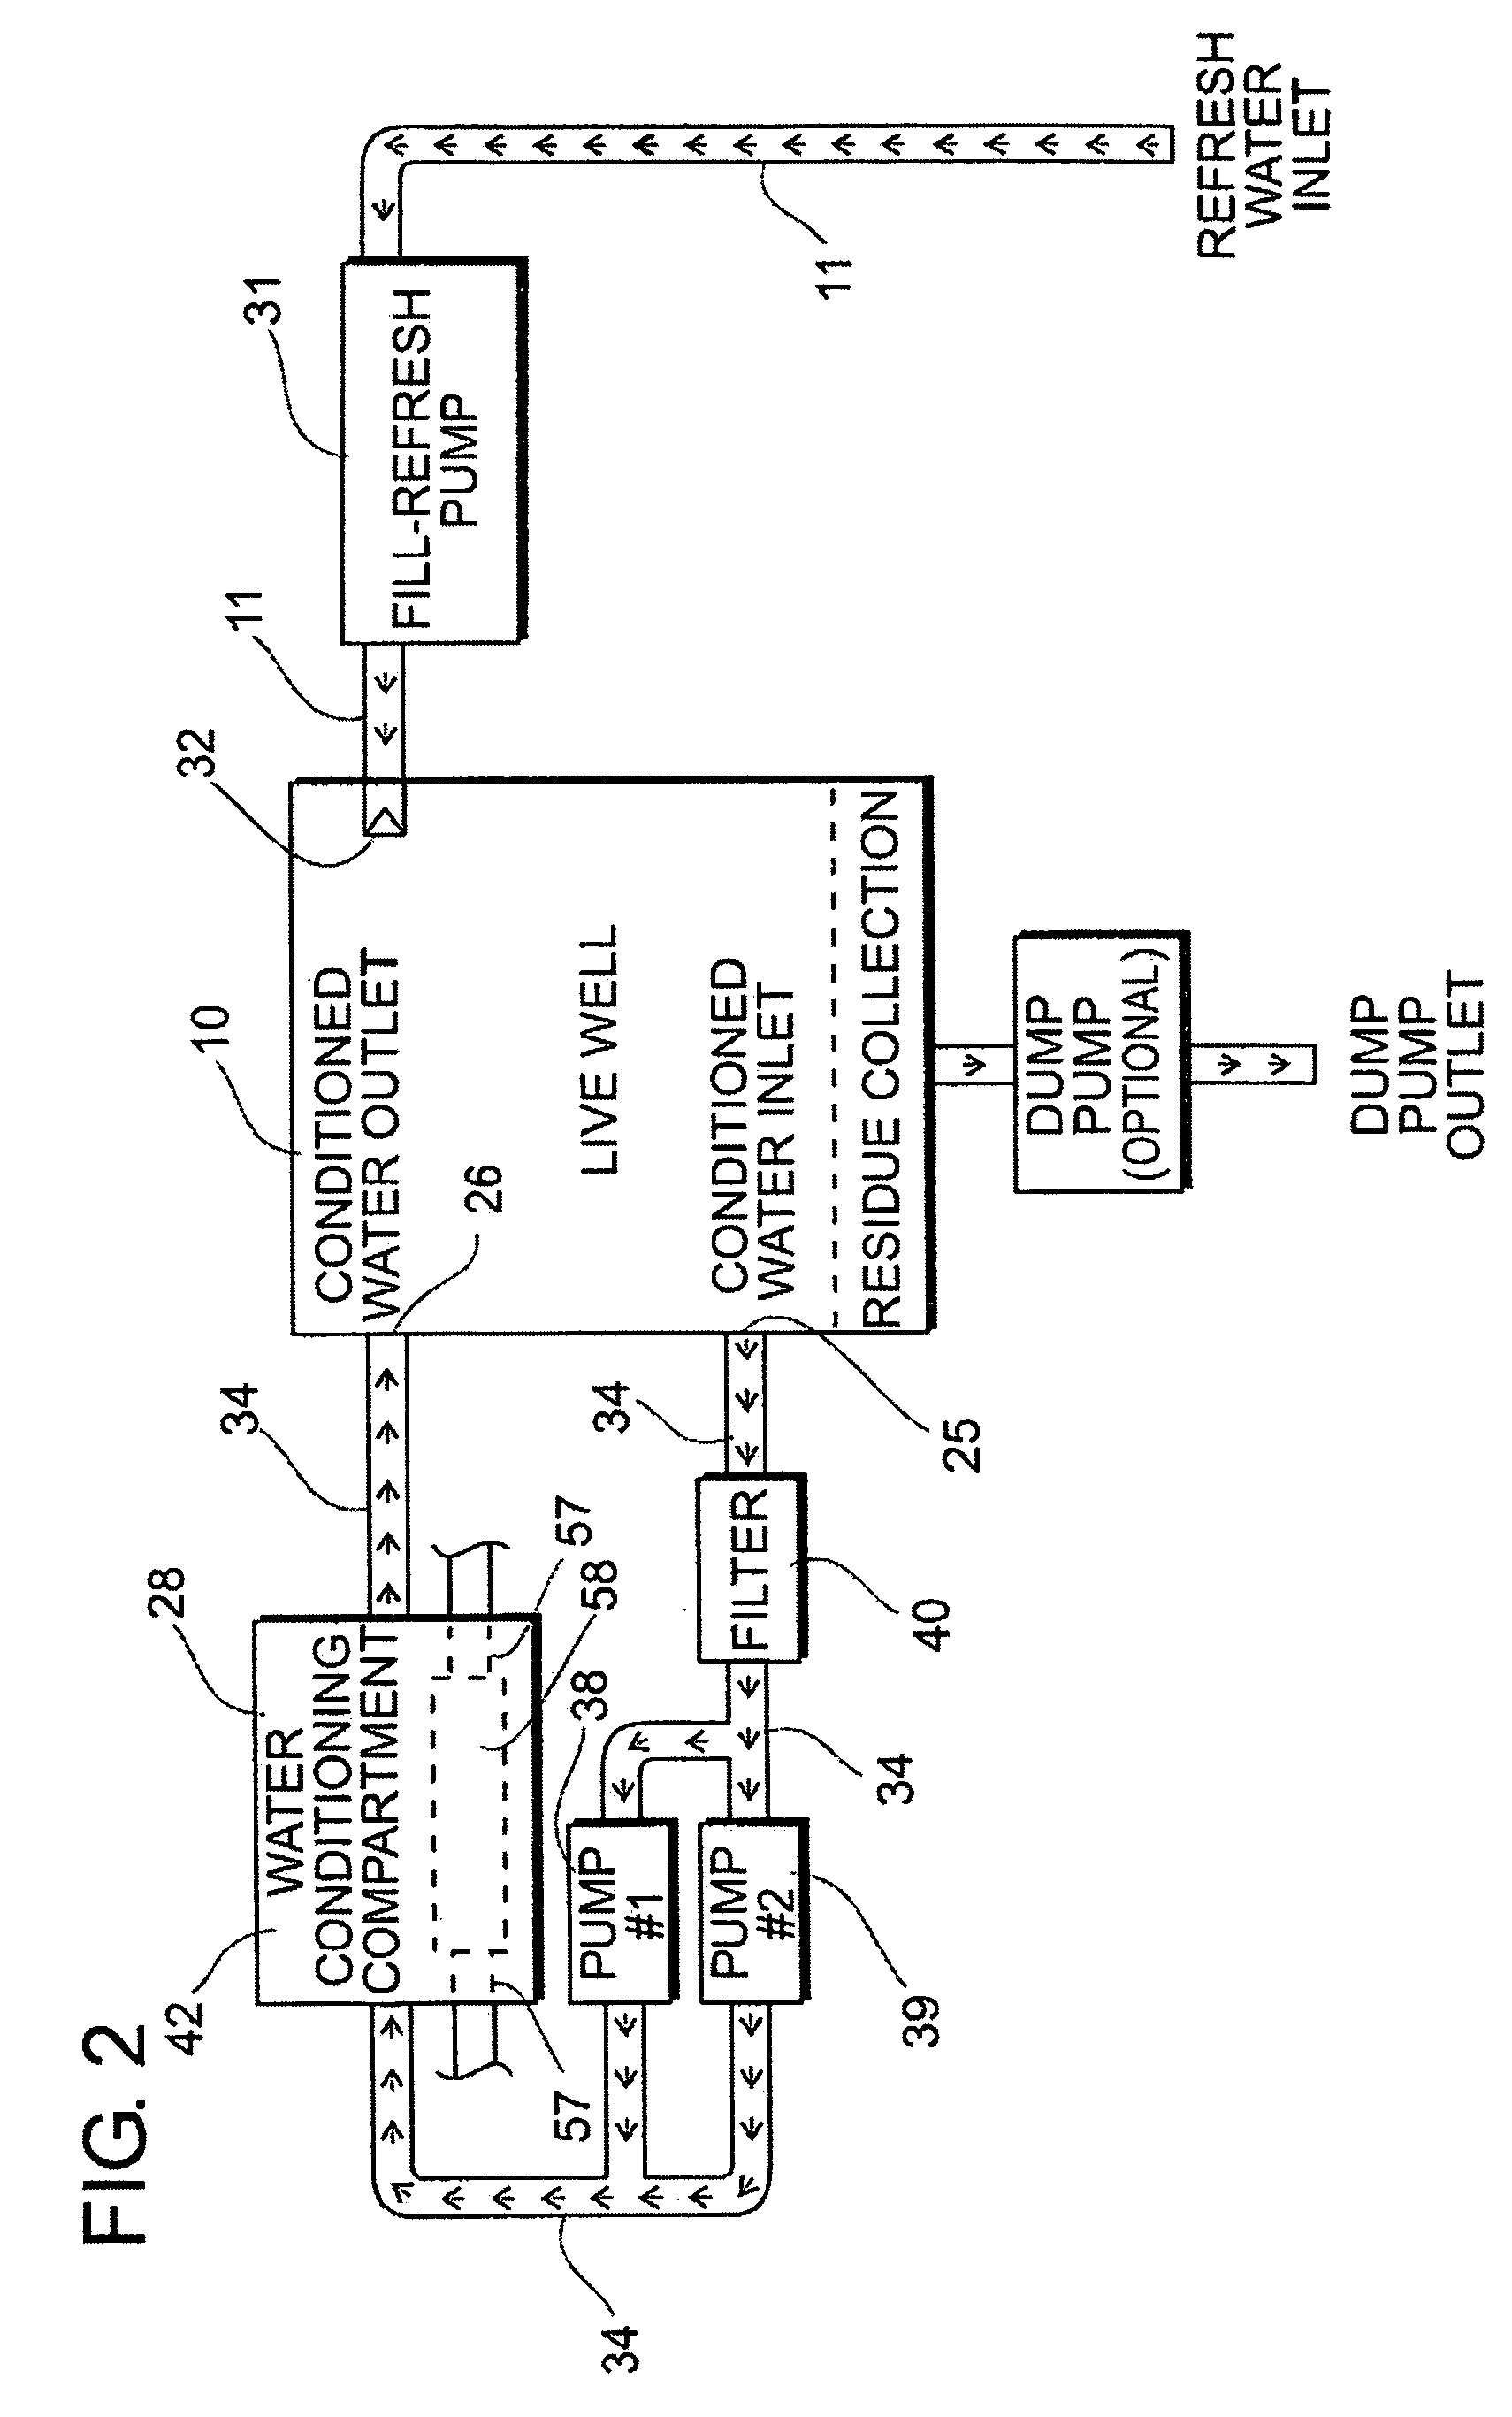 Fish or fish bait life preservation apparatus and method